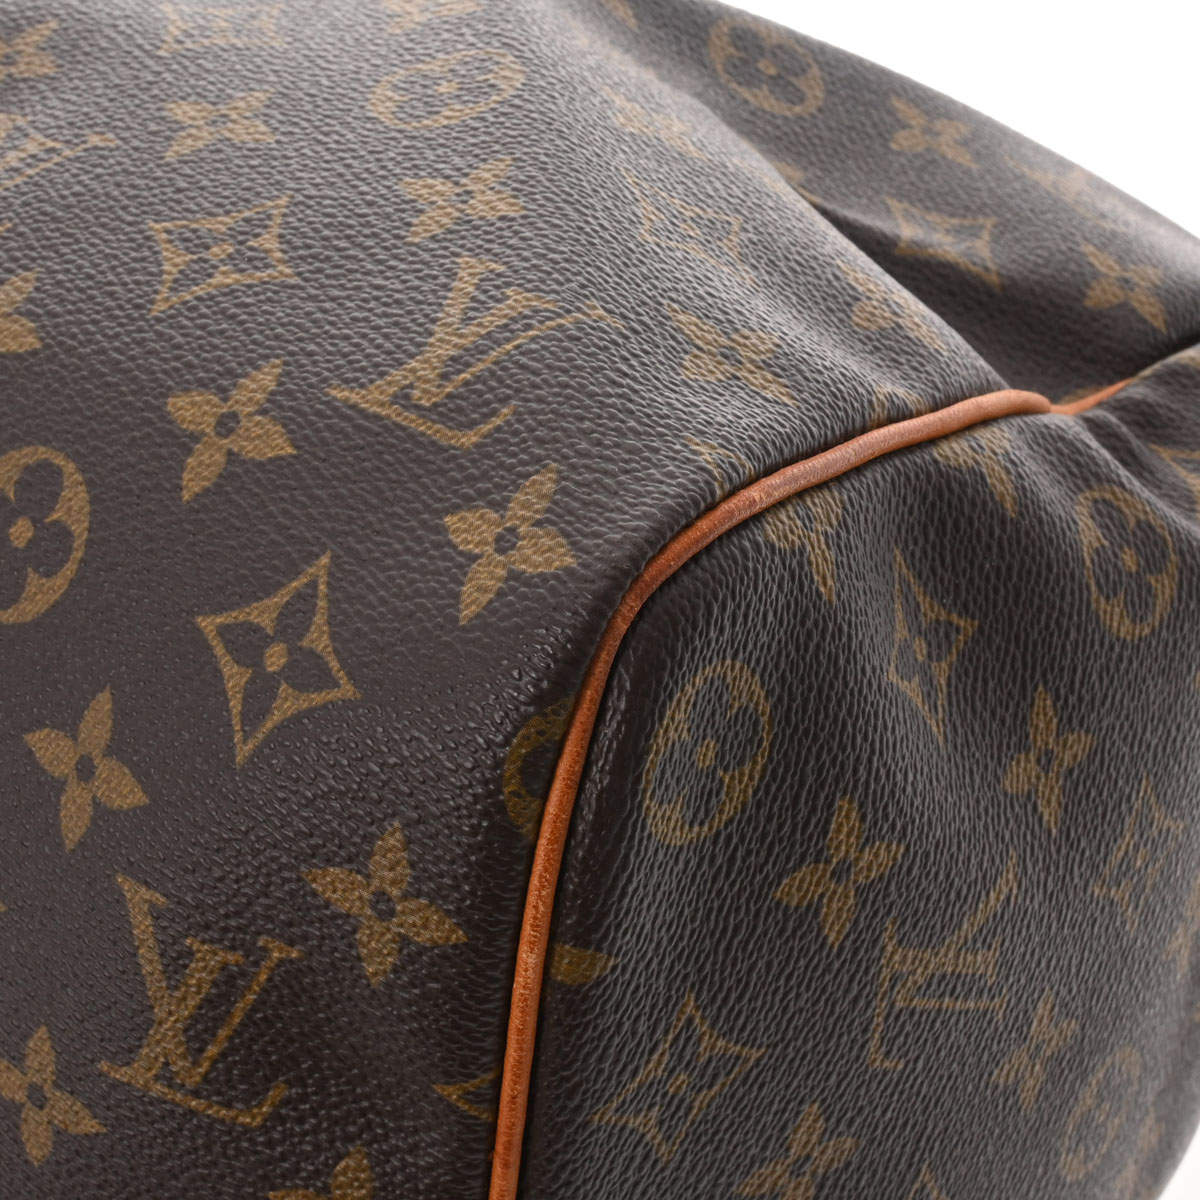 LOUIS VUITTON LOUIS VUITTON Keepall 45 Travel Boston Hand Bag M41428  Monogram Canvas Used LV M41428｜Product Code：2100301098077｜BRAND OFF Online  Store